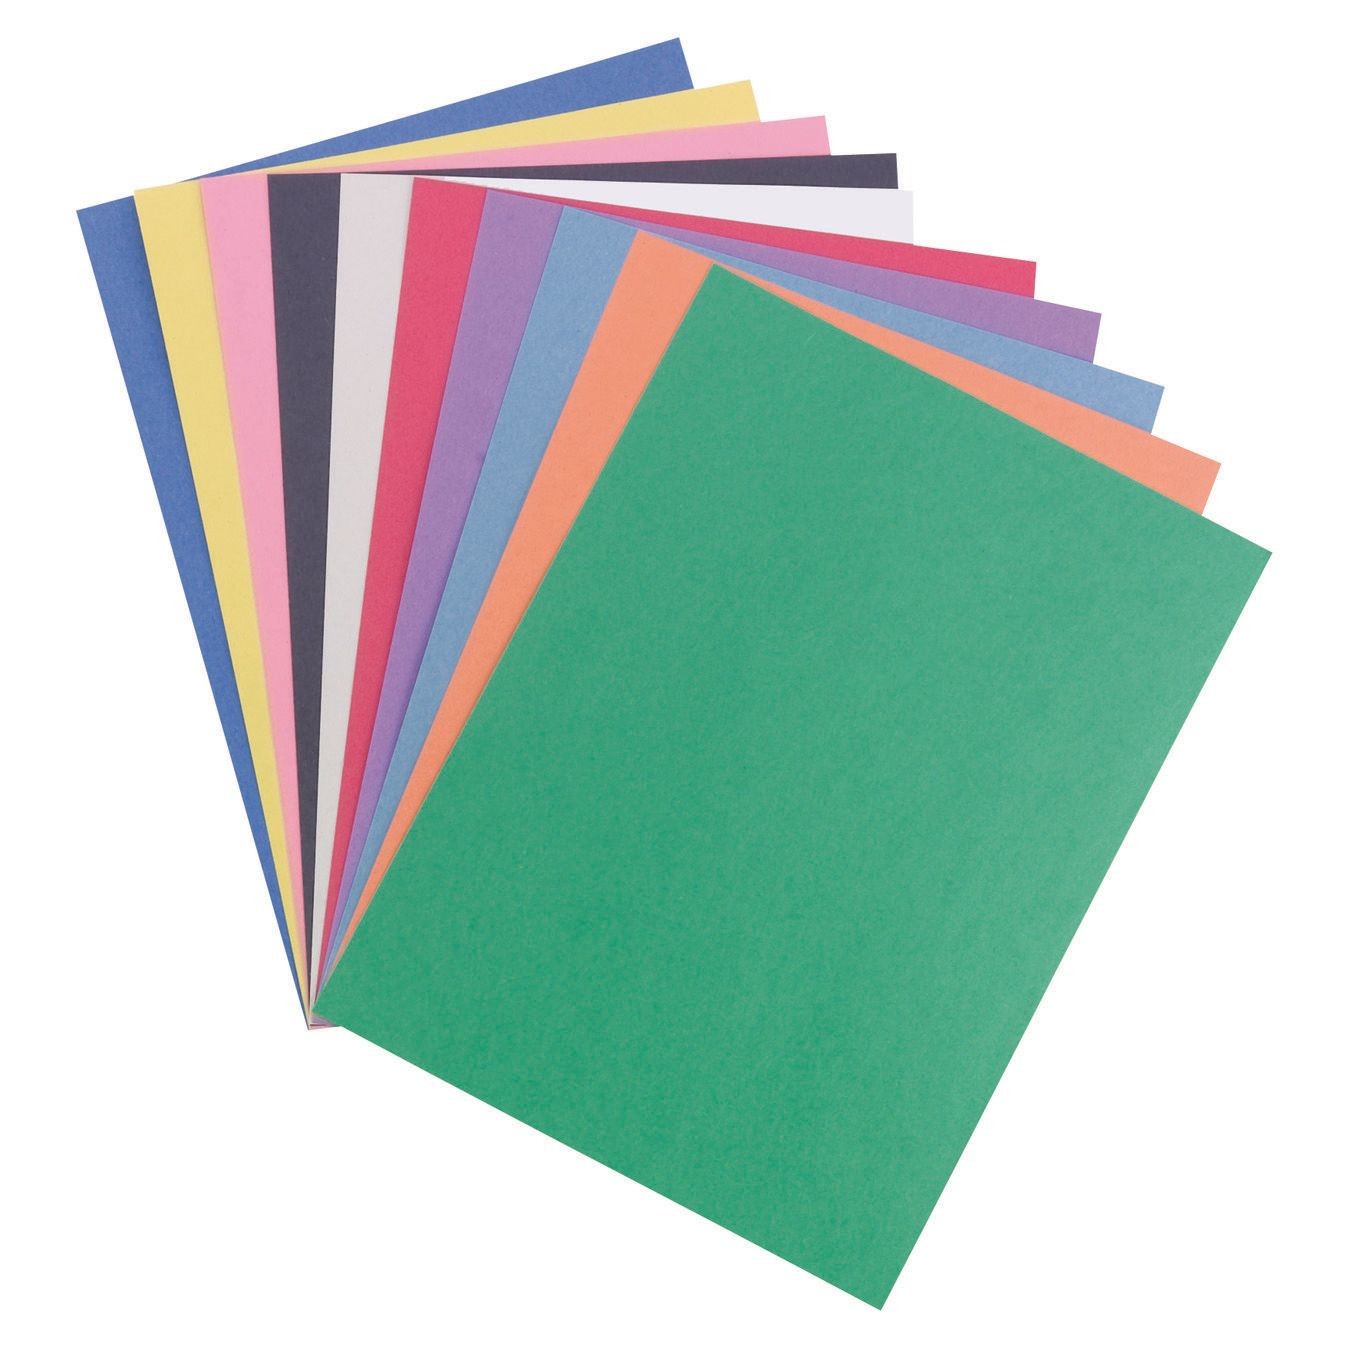 Buy Prang® Groundwood Construction Paper, 10 Colors, 9 x 12 (Pack of 100)  at S&S Worldwide